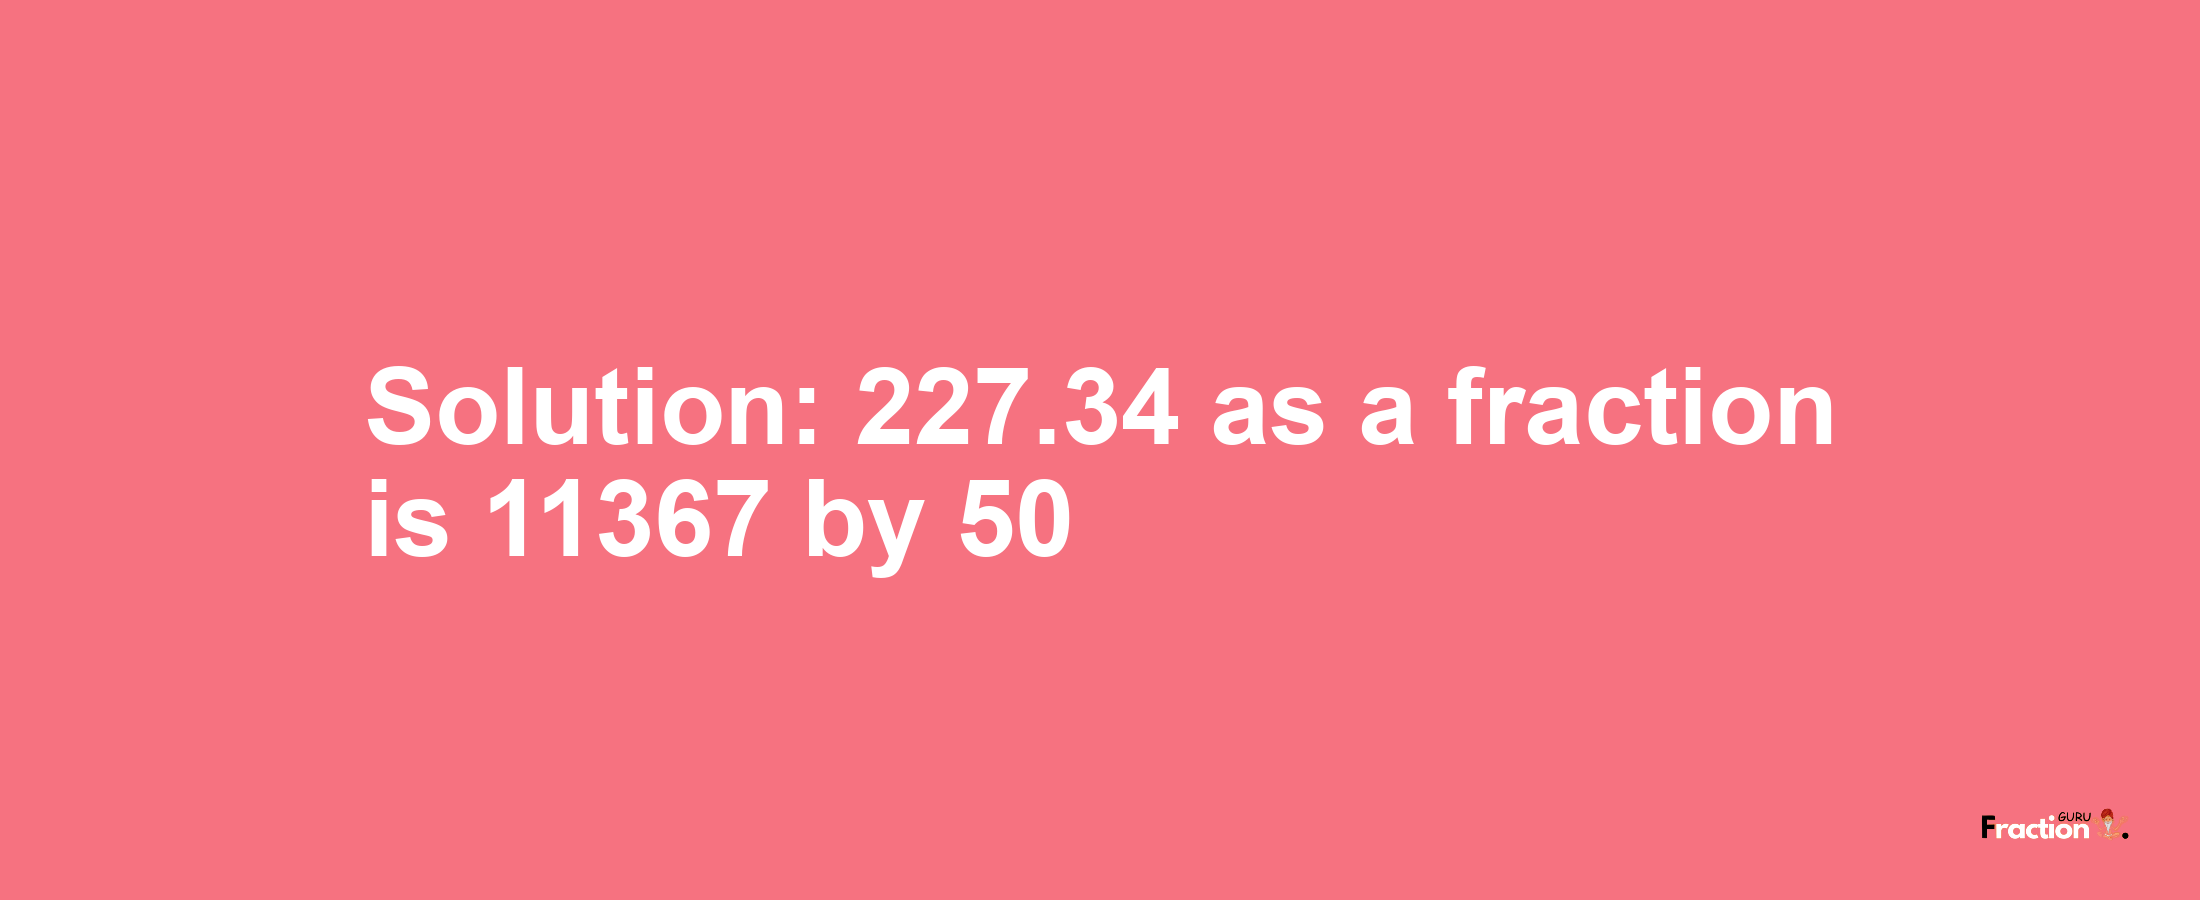 Solution:227.34 as a fraction is 11367/50